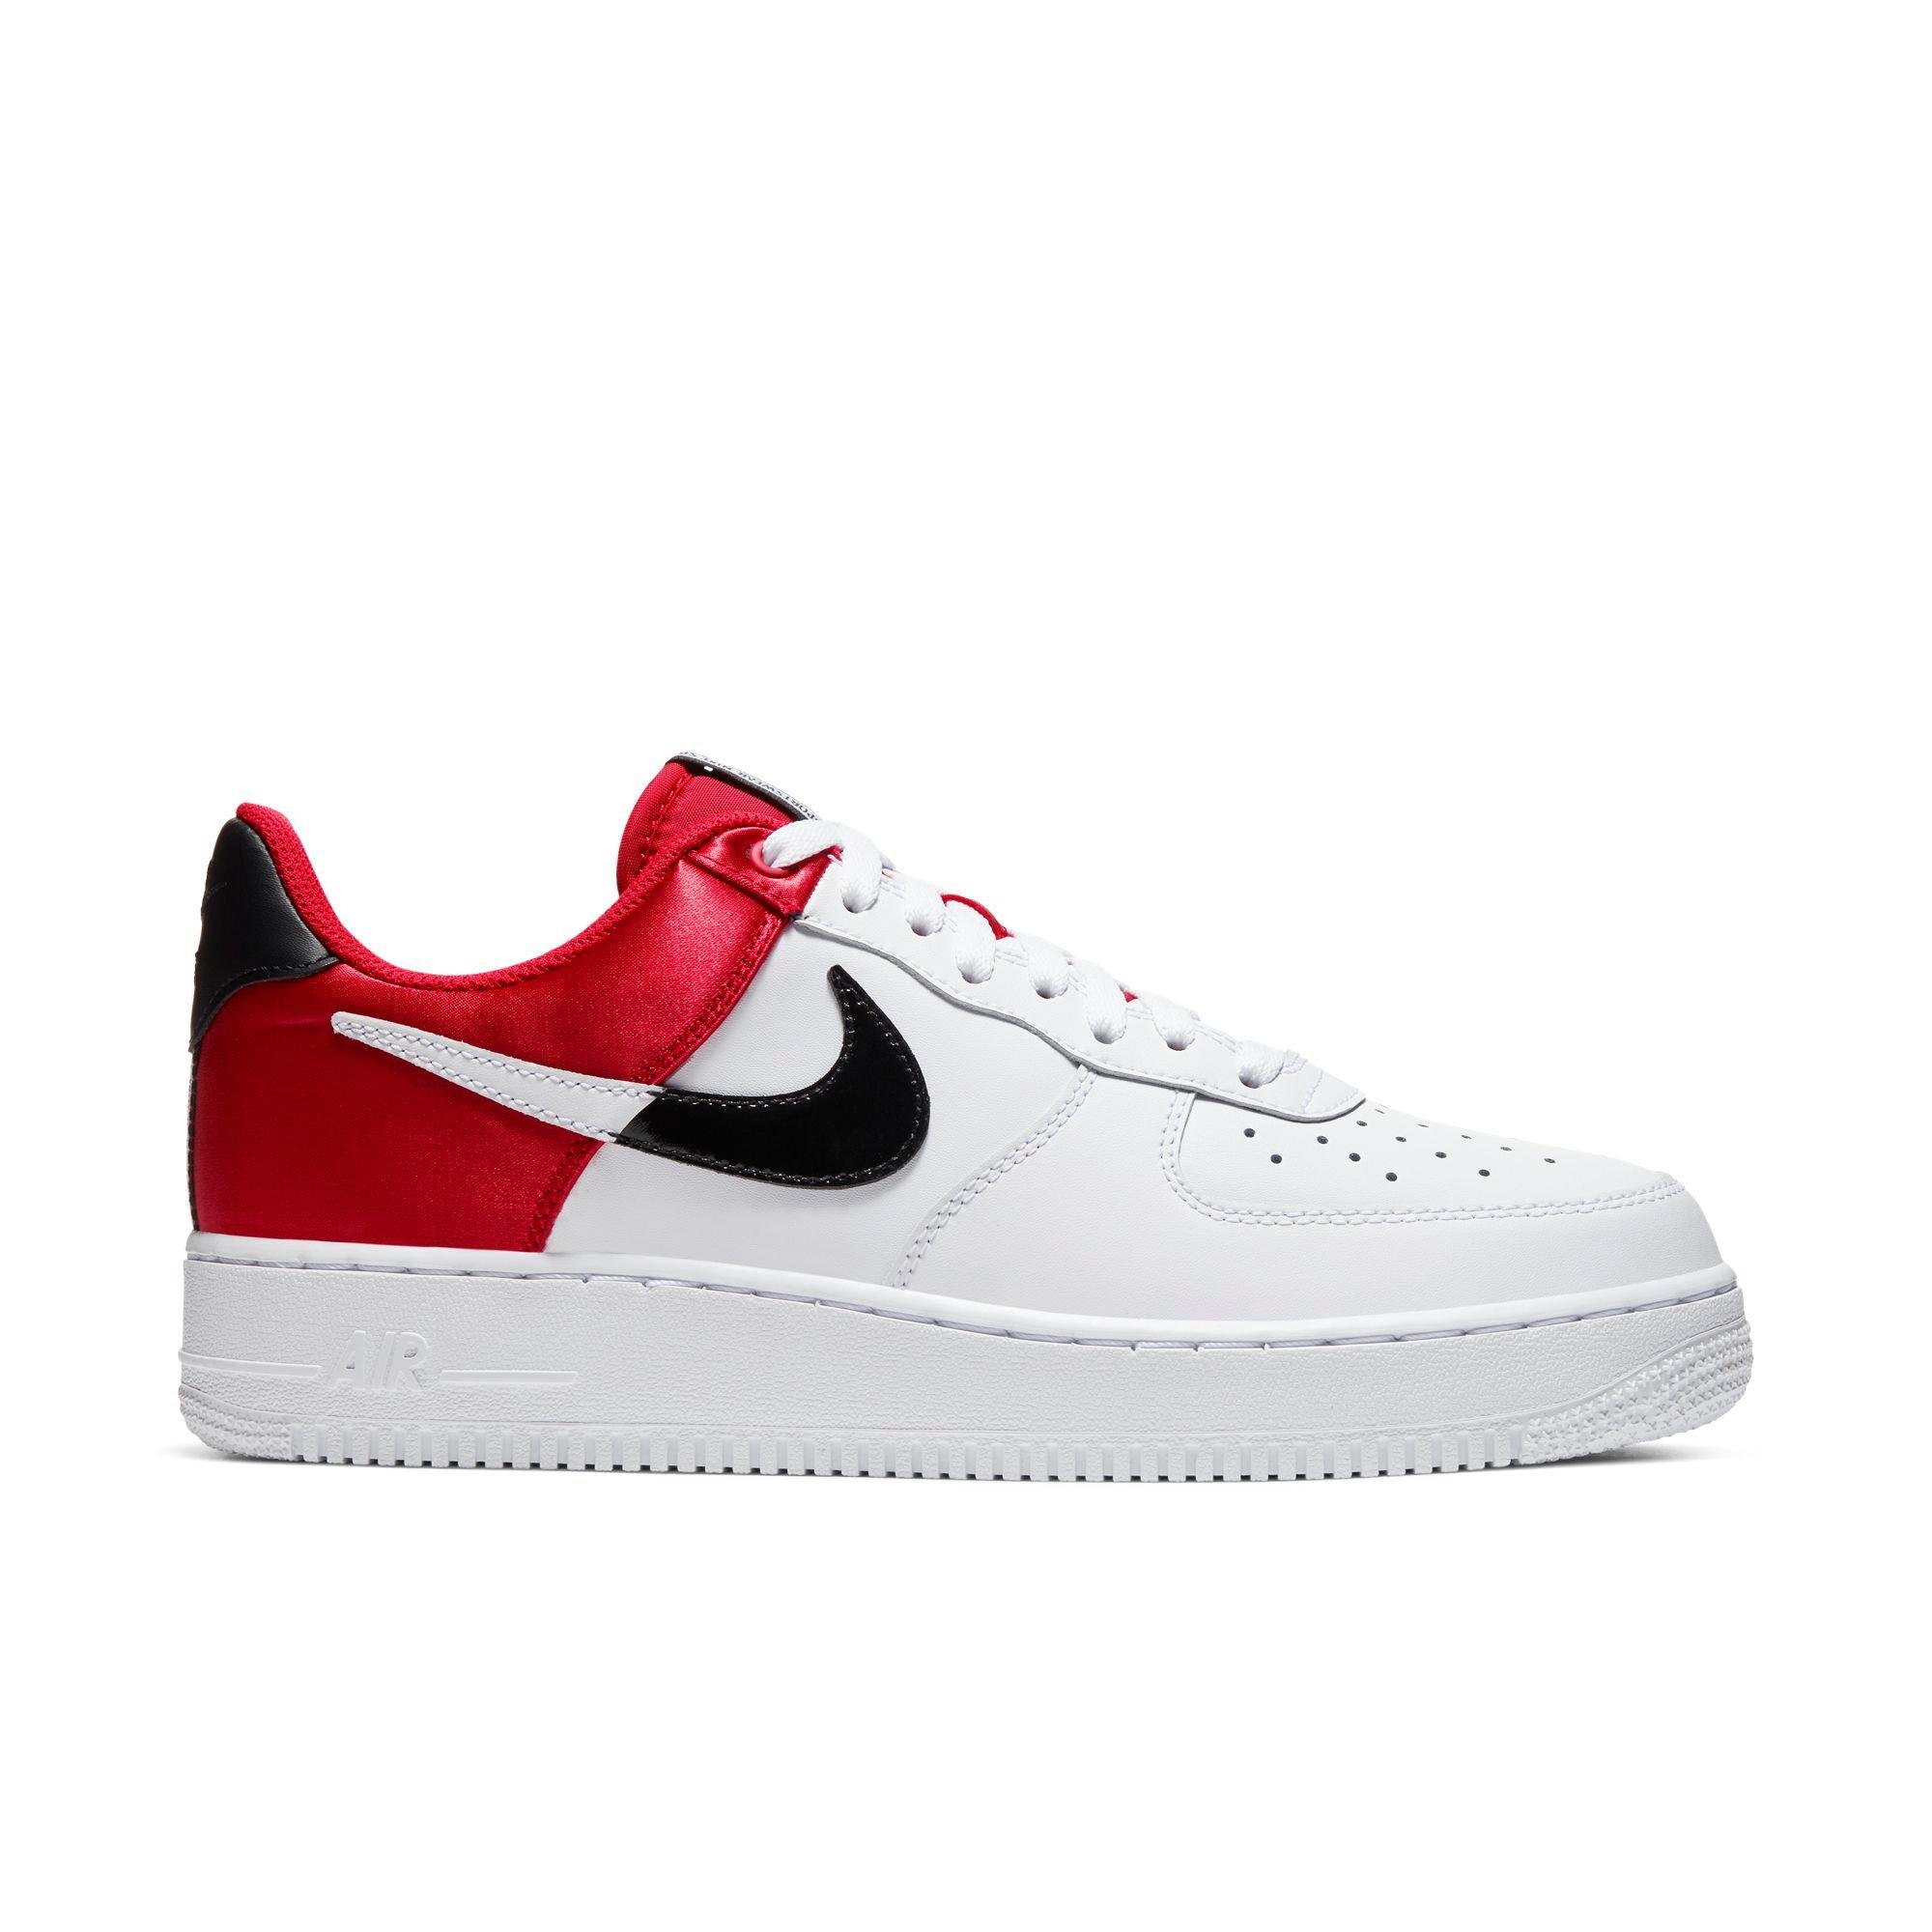 nike air force 1 men's red and white